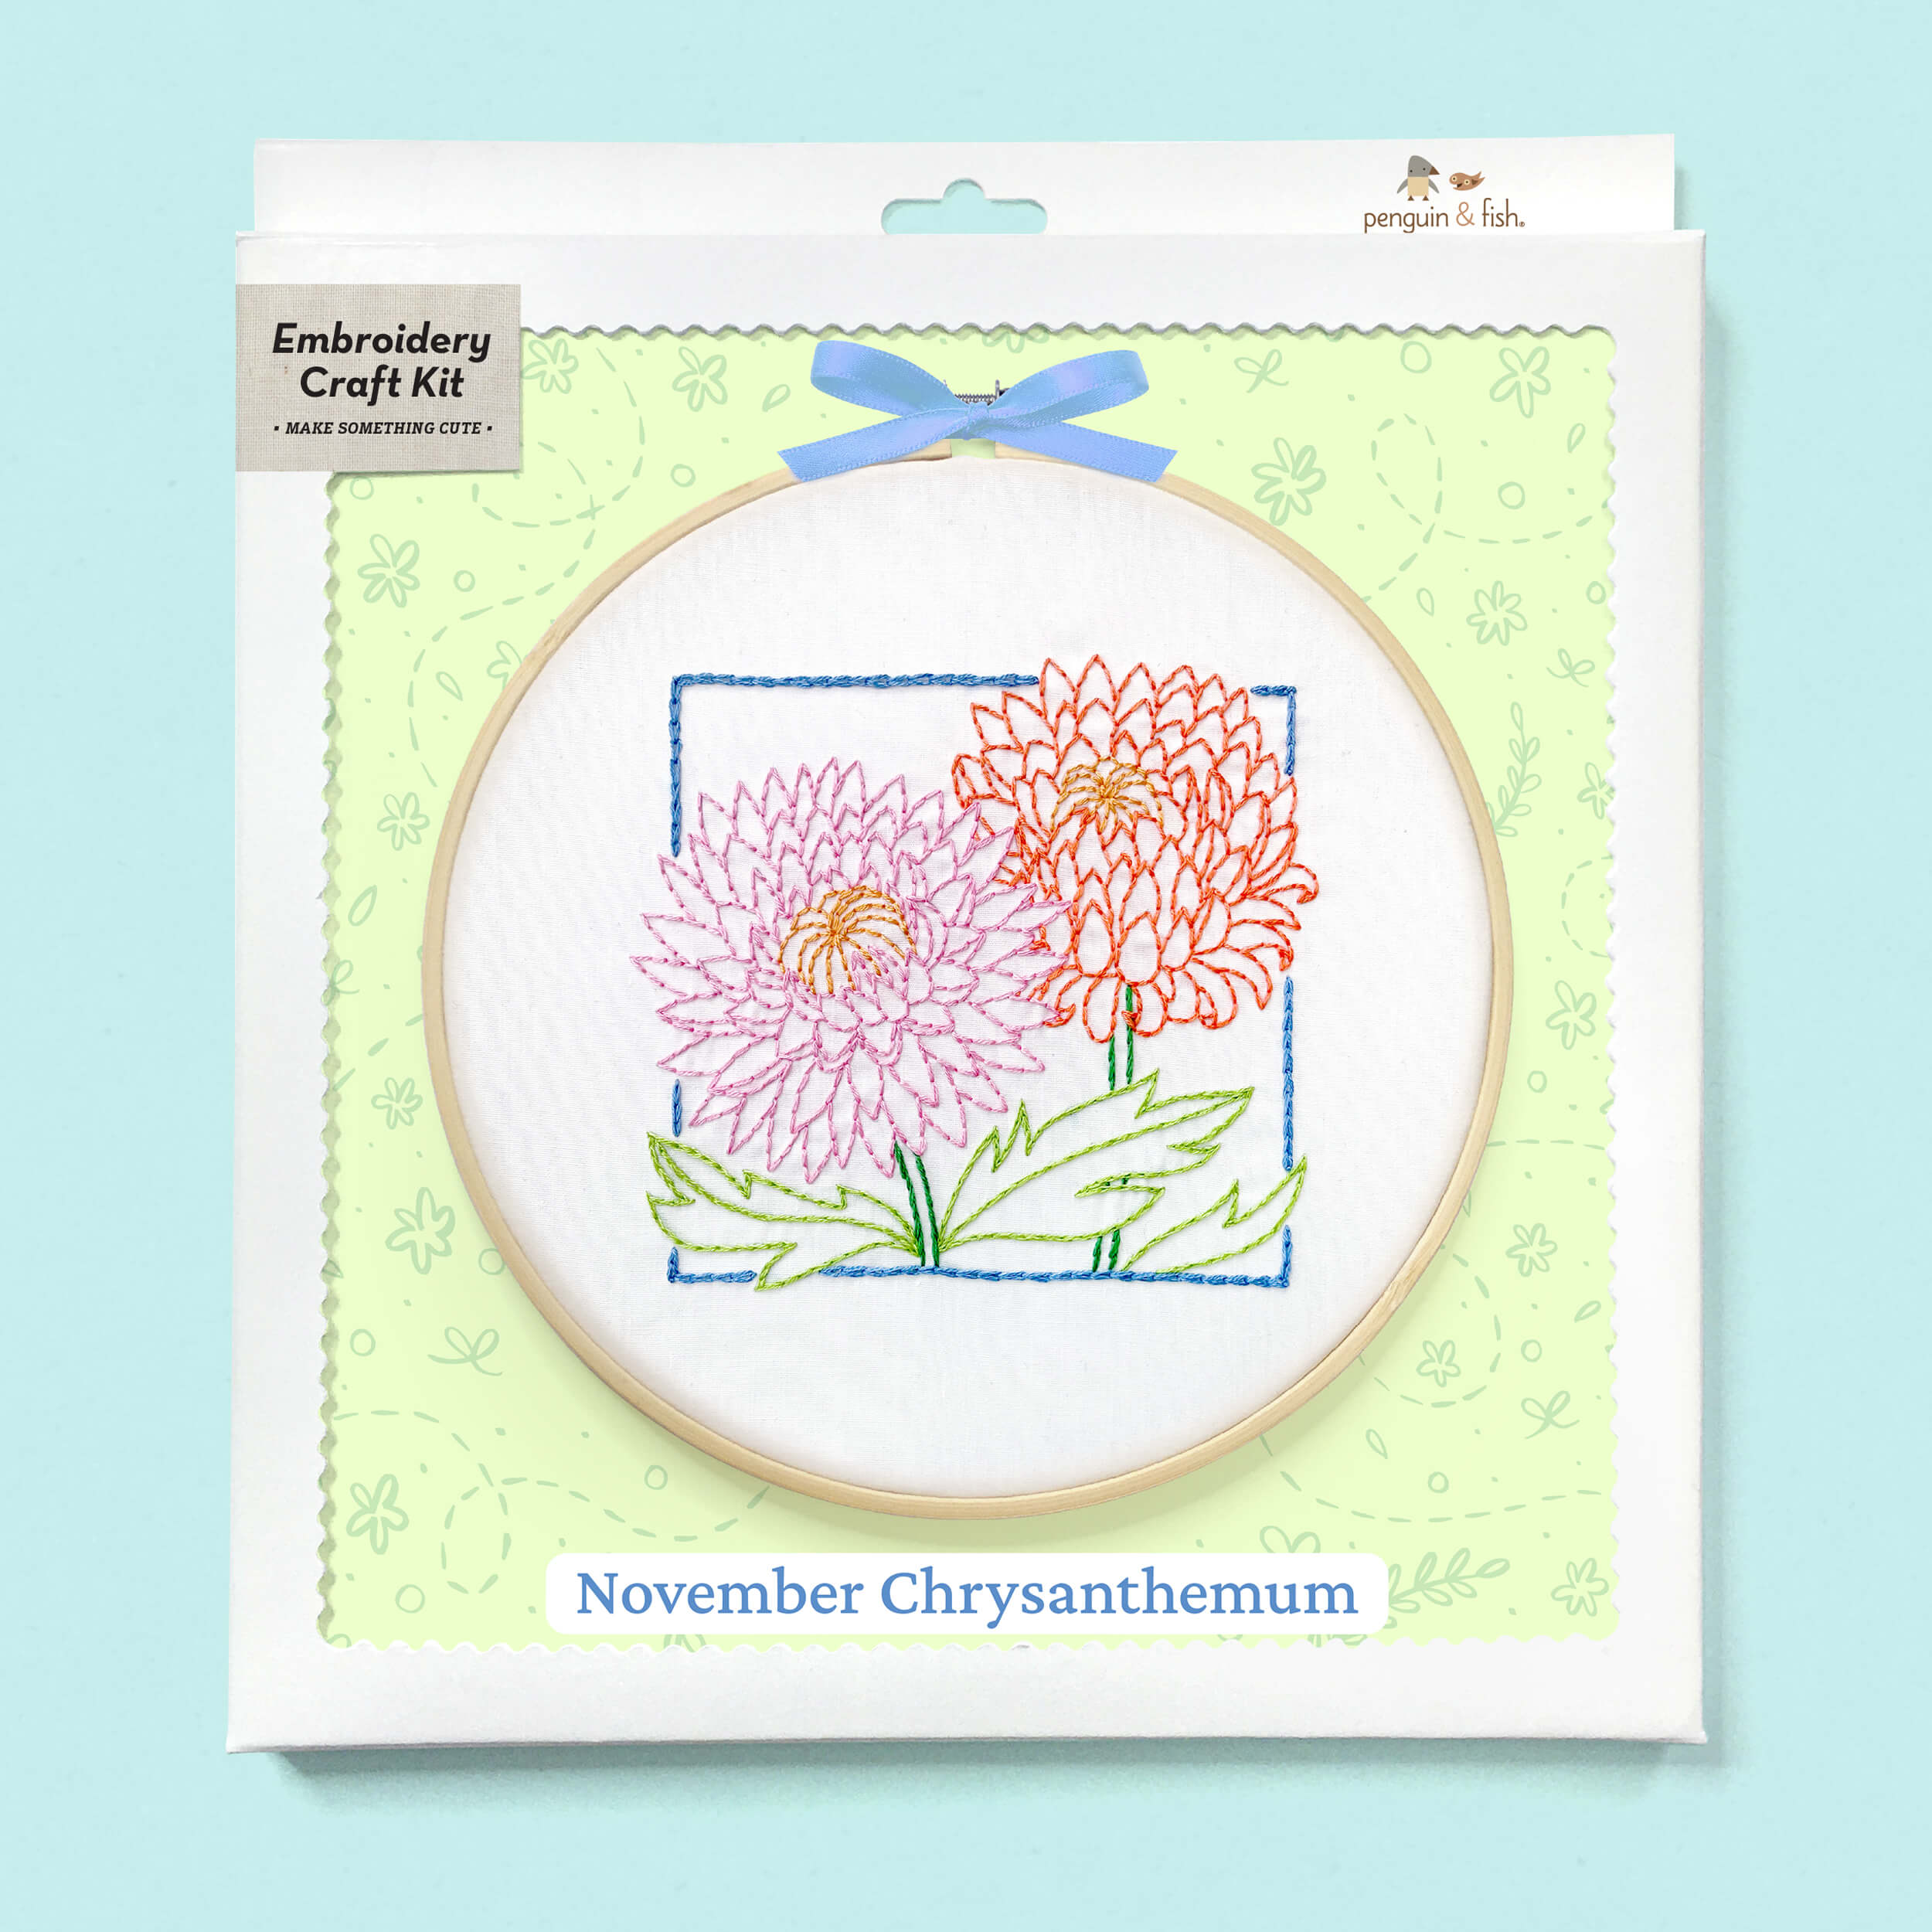 November Chrysanthemum embroidery kit in a box